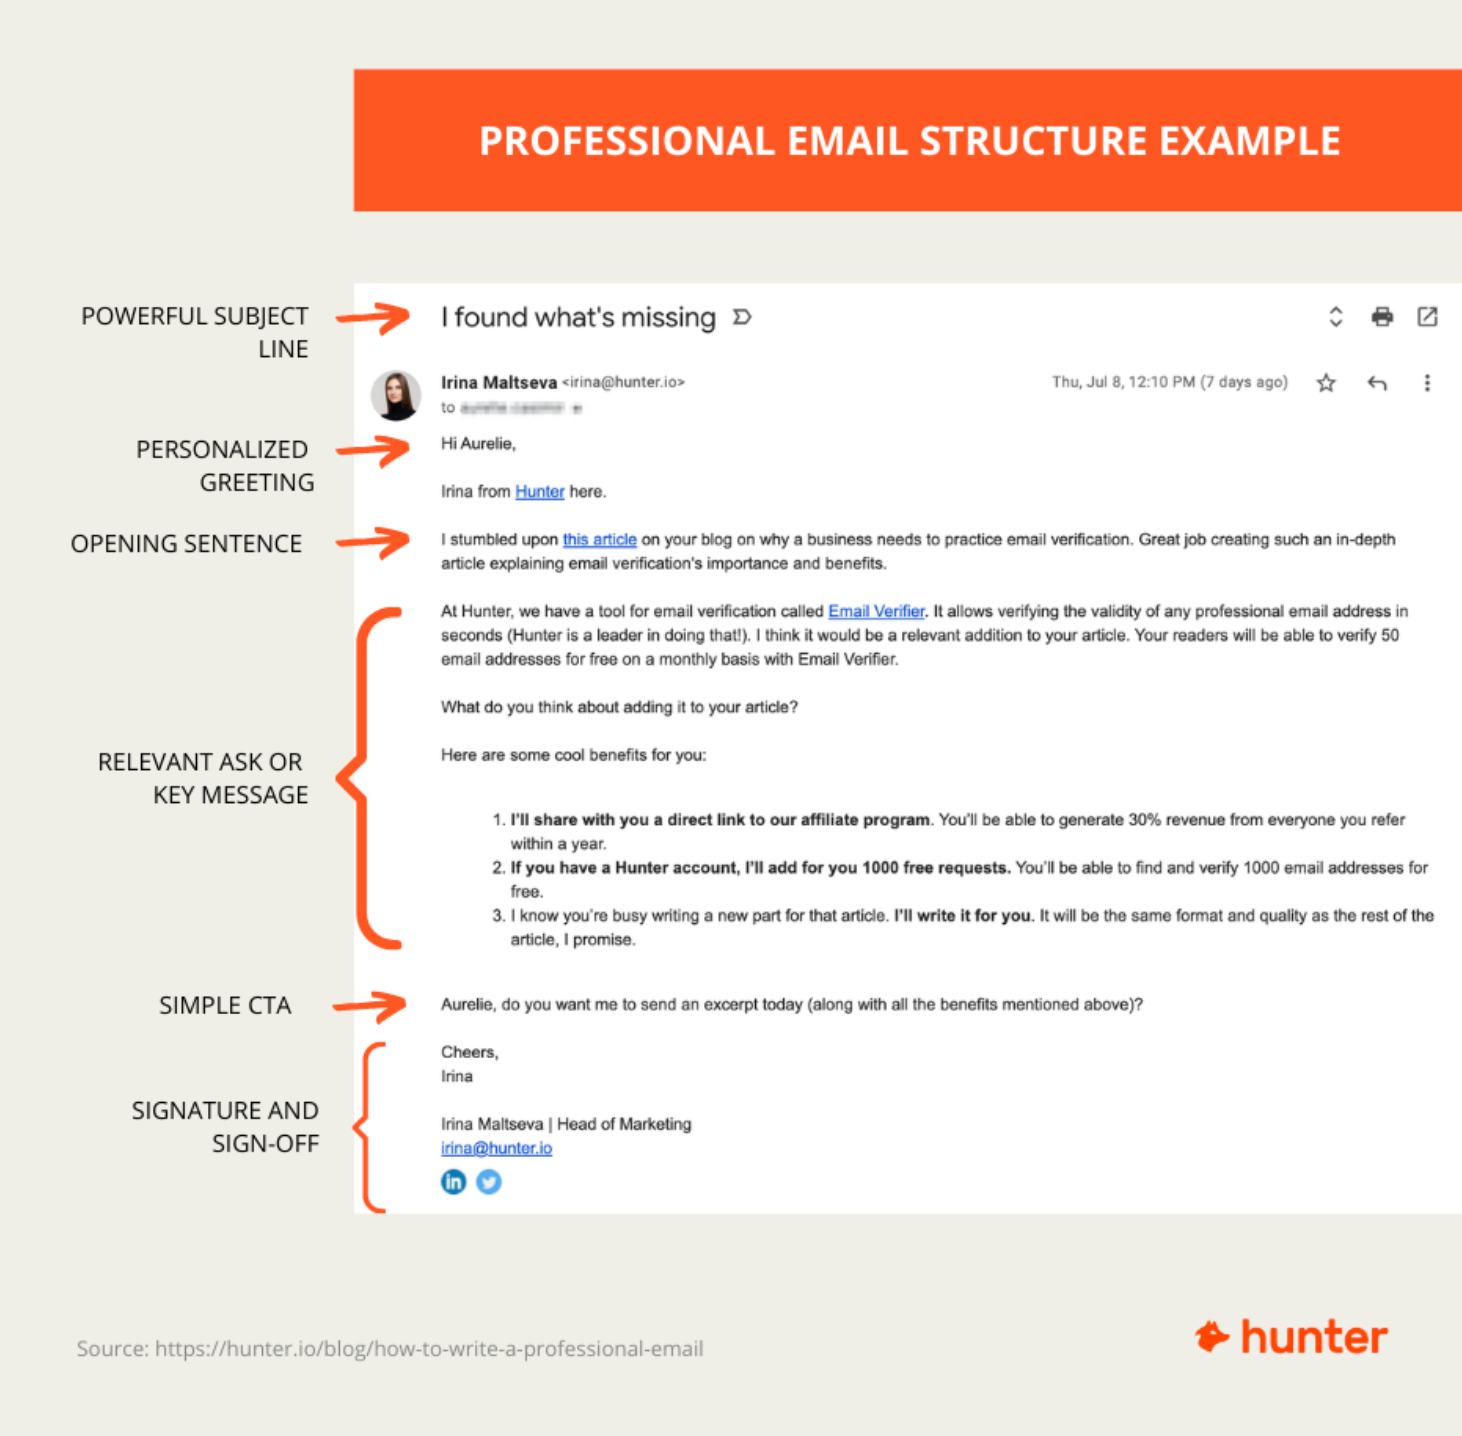 Professional email structure example